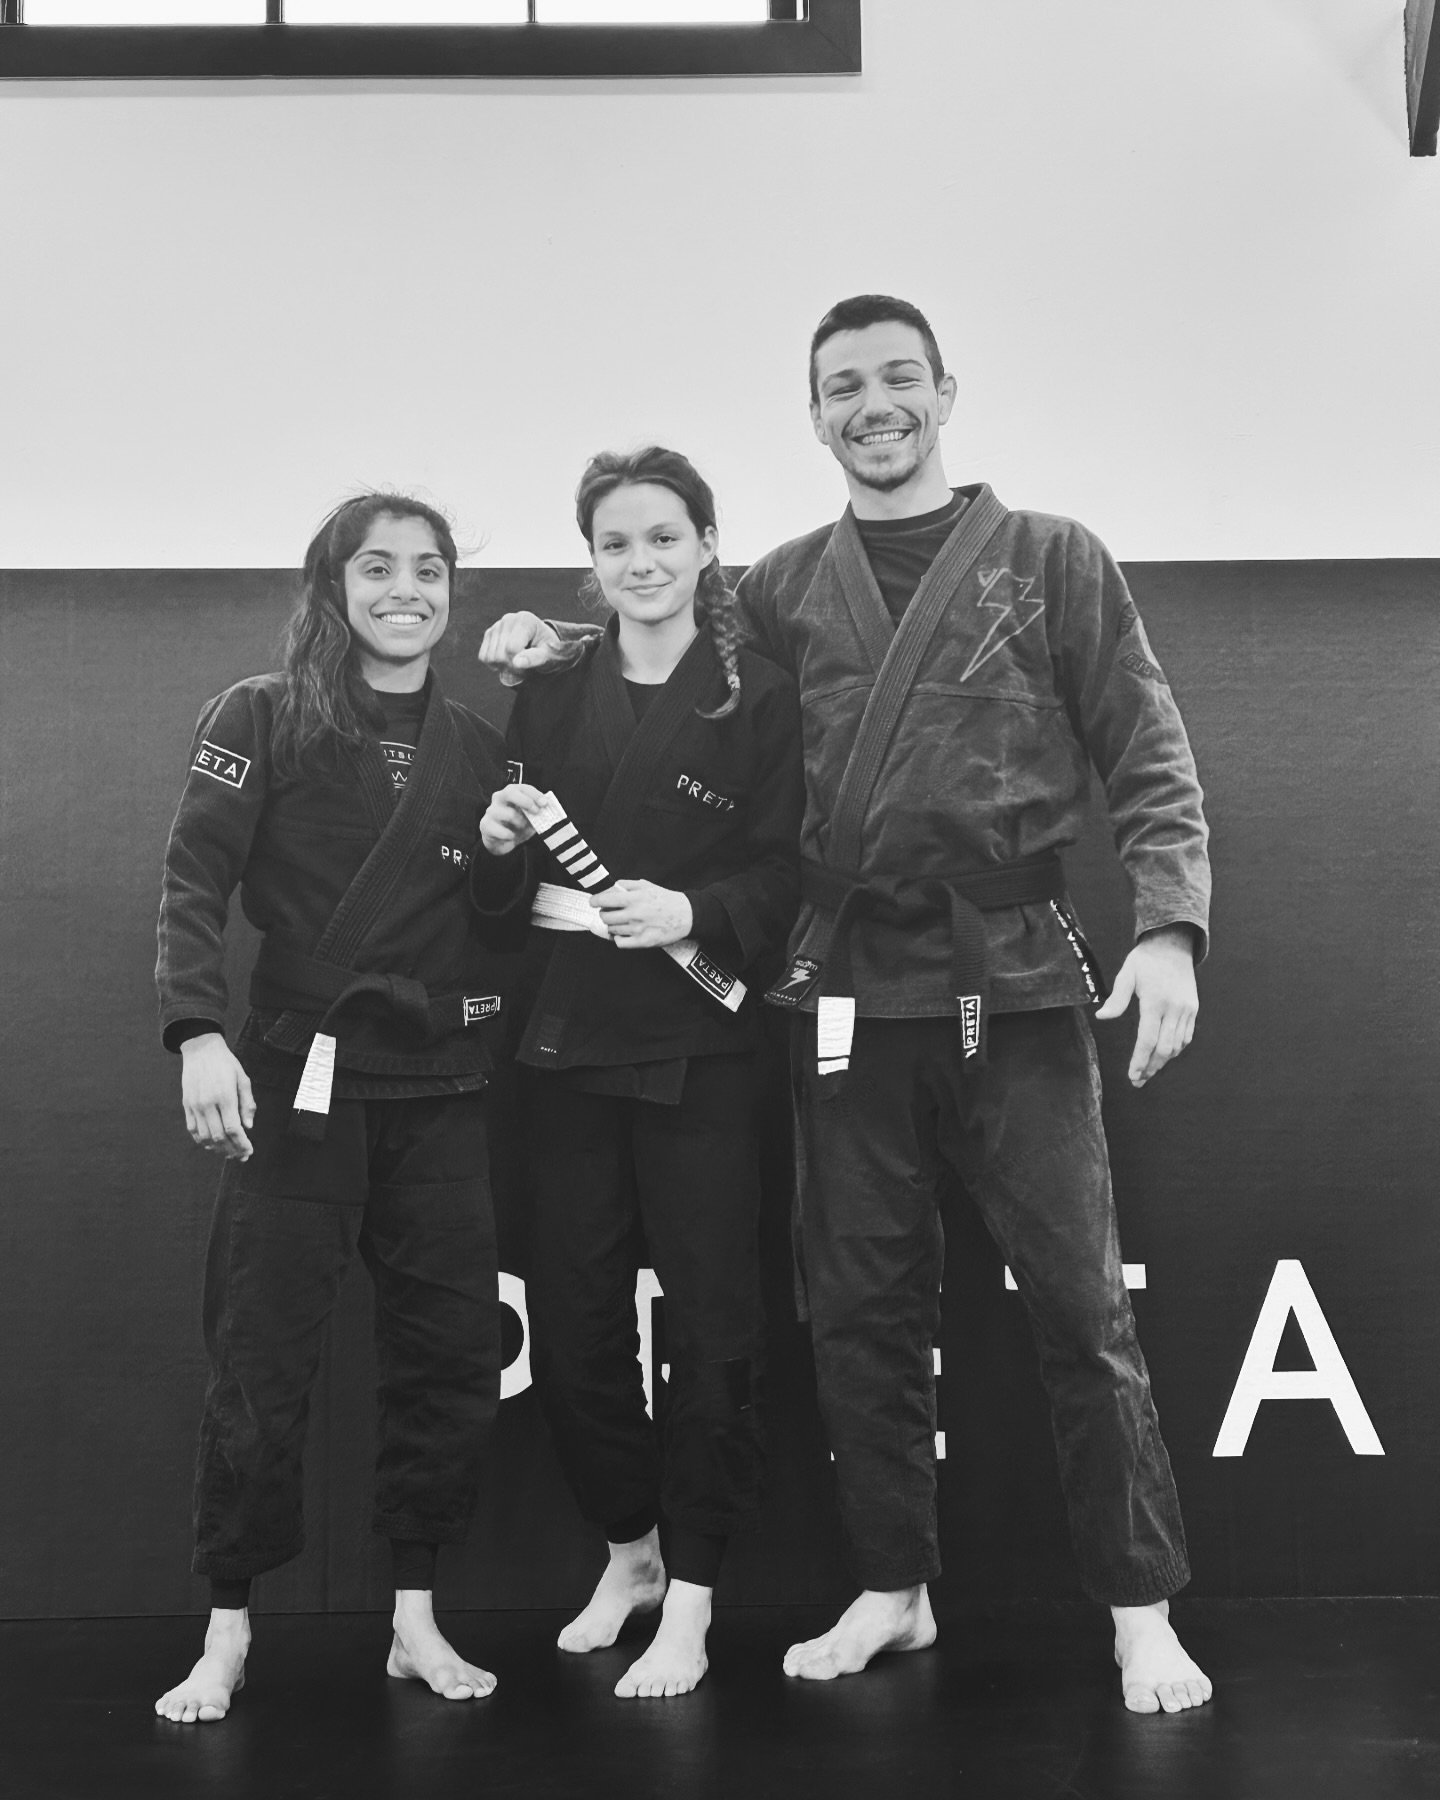 Some Monday Motivation 💪🏼

Stripe #4 for Elena 🥋

Elena has been a stand out with her tenacity on the mats lately..watch out for those collar ties! 😉 

Let&rsquo;s keep up the great work this week 🔥